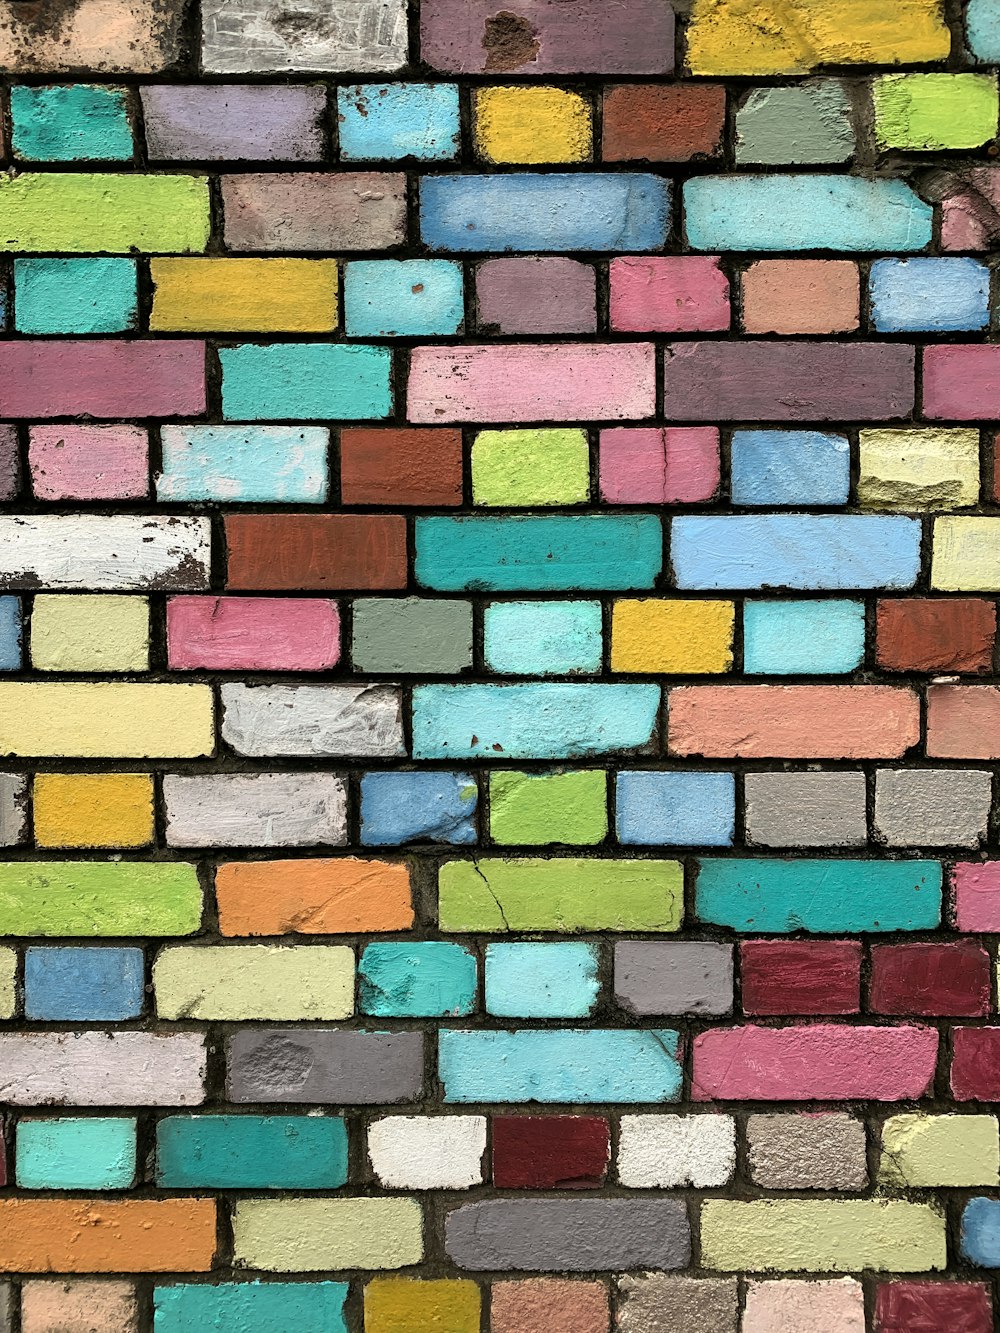 a multicolored brick wall is shown in this image